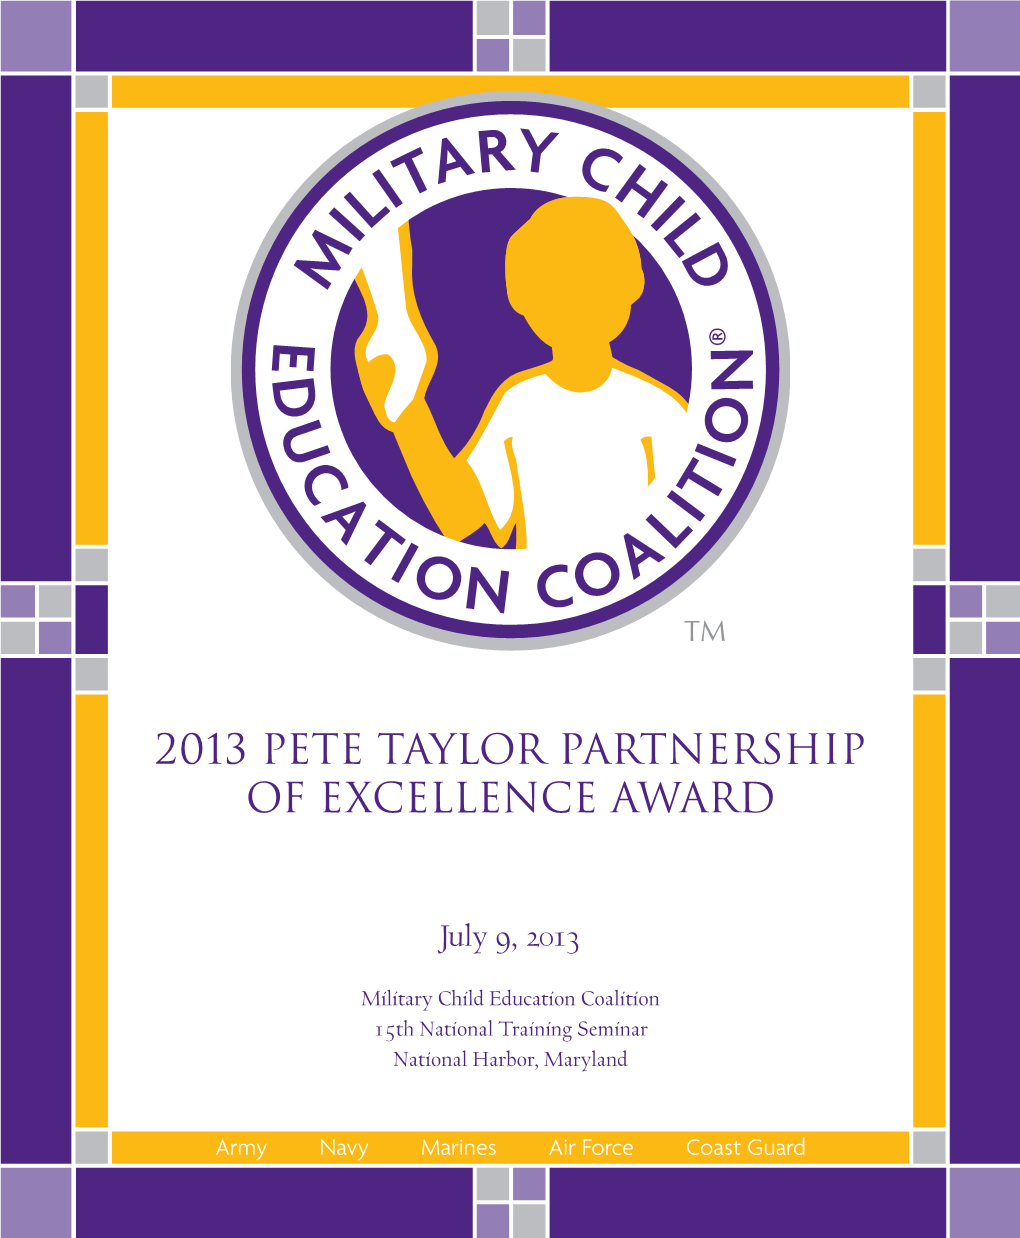 2013 PETE TAYLOR Partnership of Excellence Award